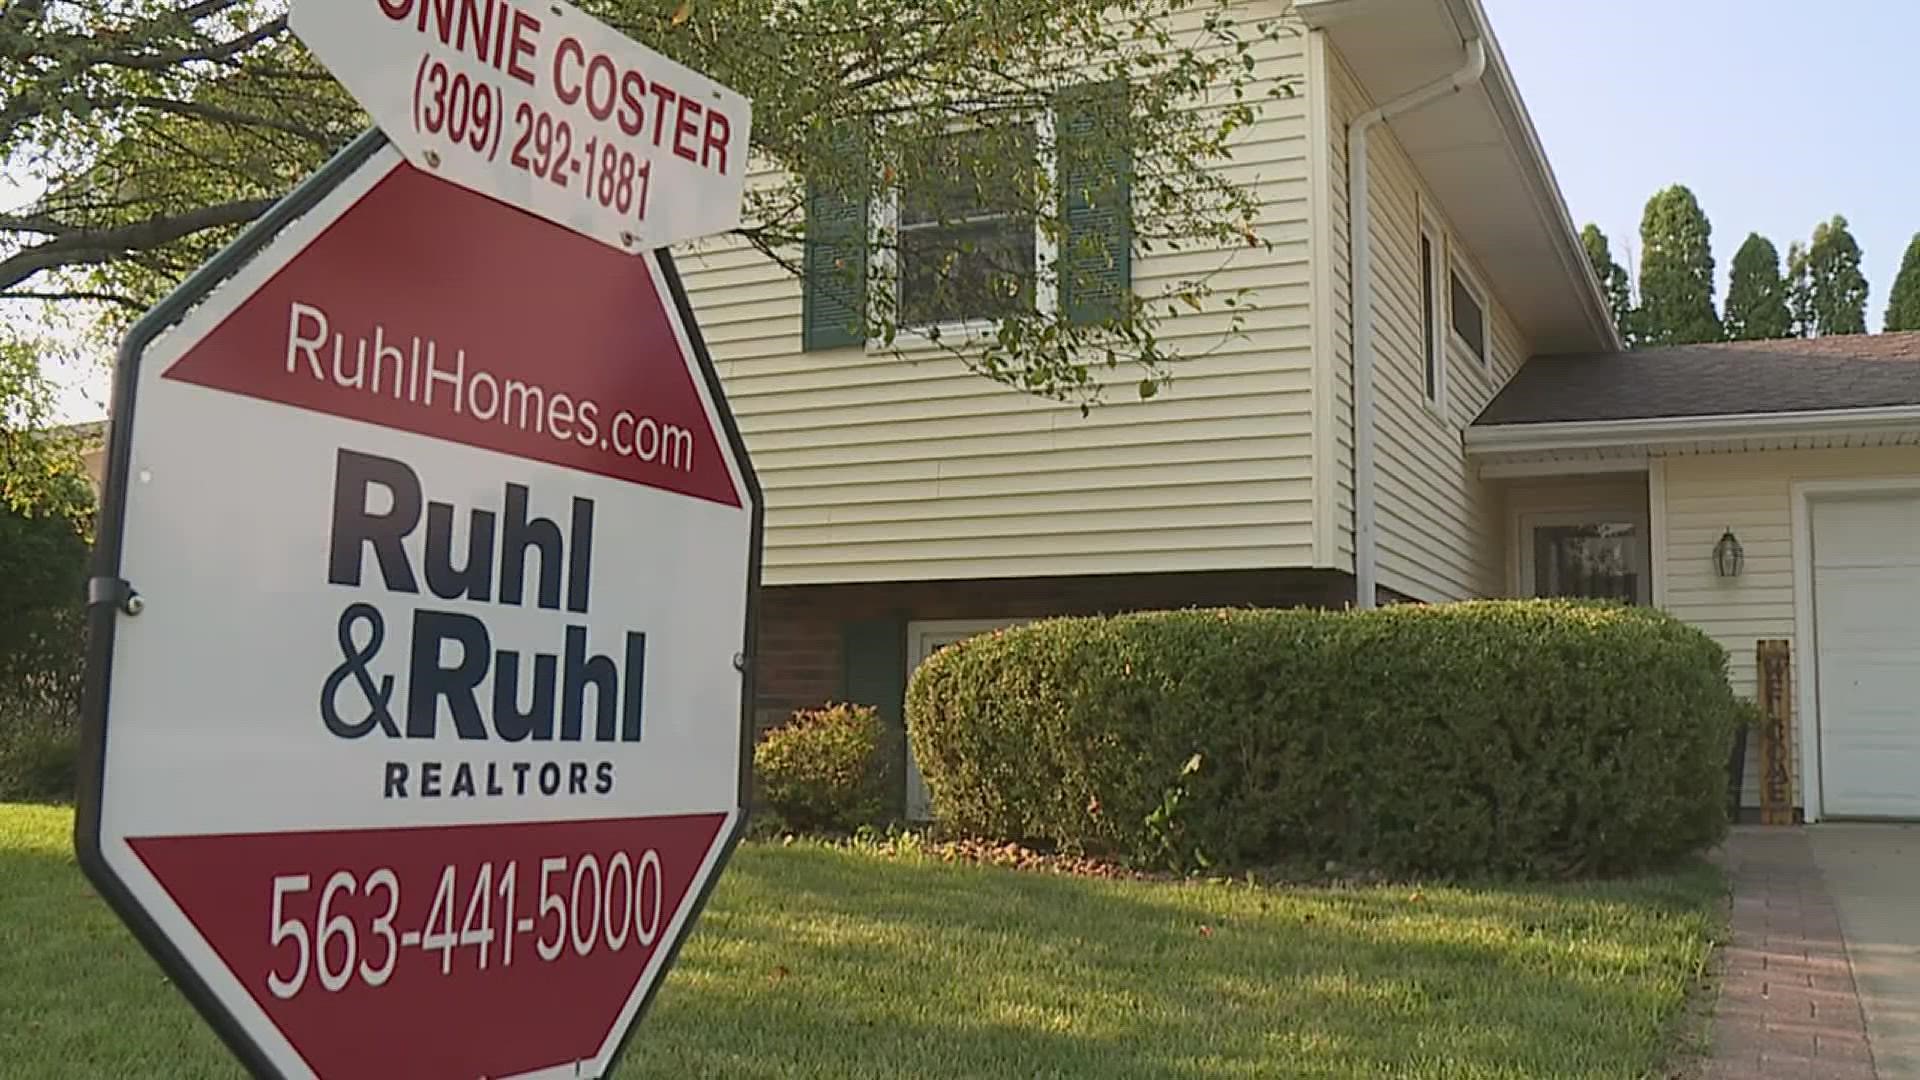 Quad Cities realtors say the local housing market inventory is at a 16-year low, while prices are at a 15-year high.